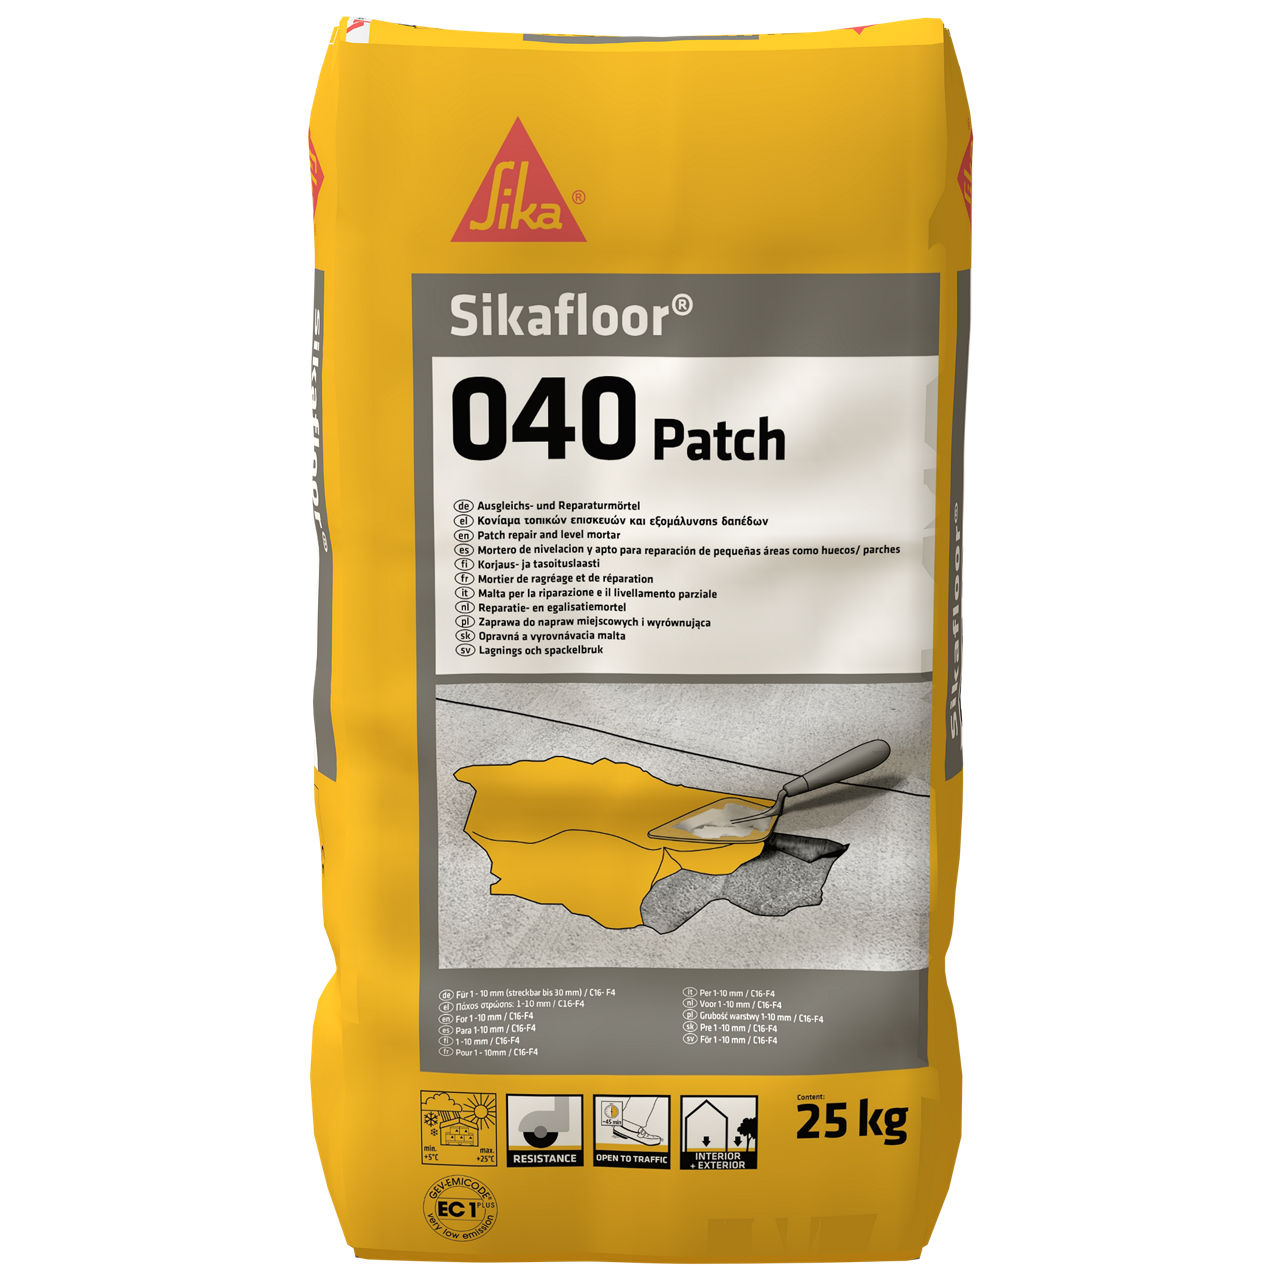 Sika® Sikafloor® -040 Patch